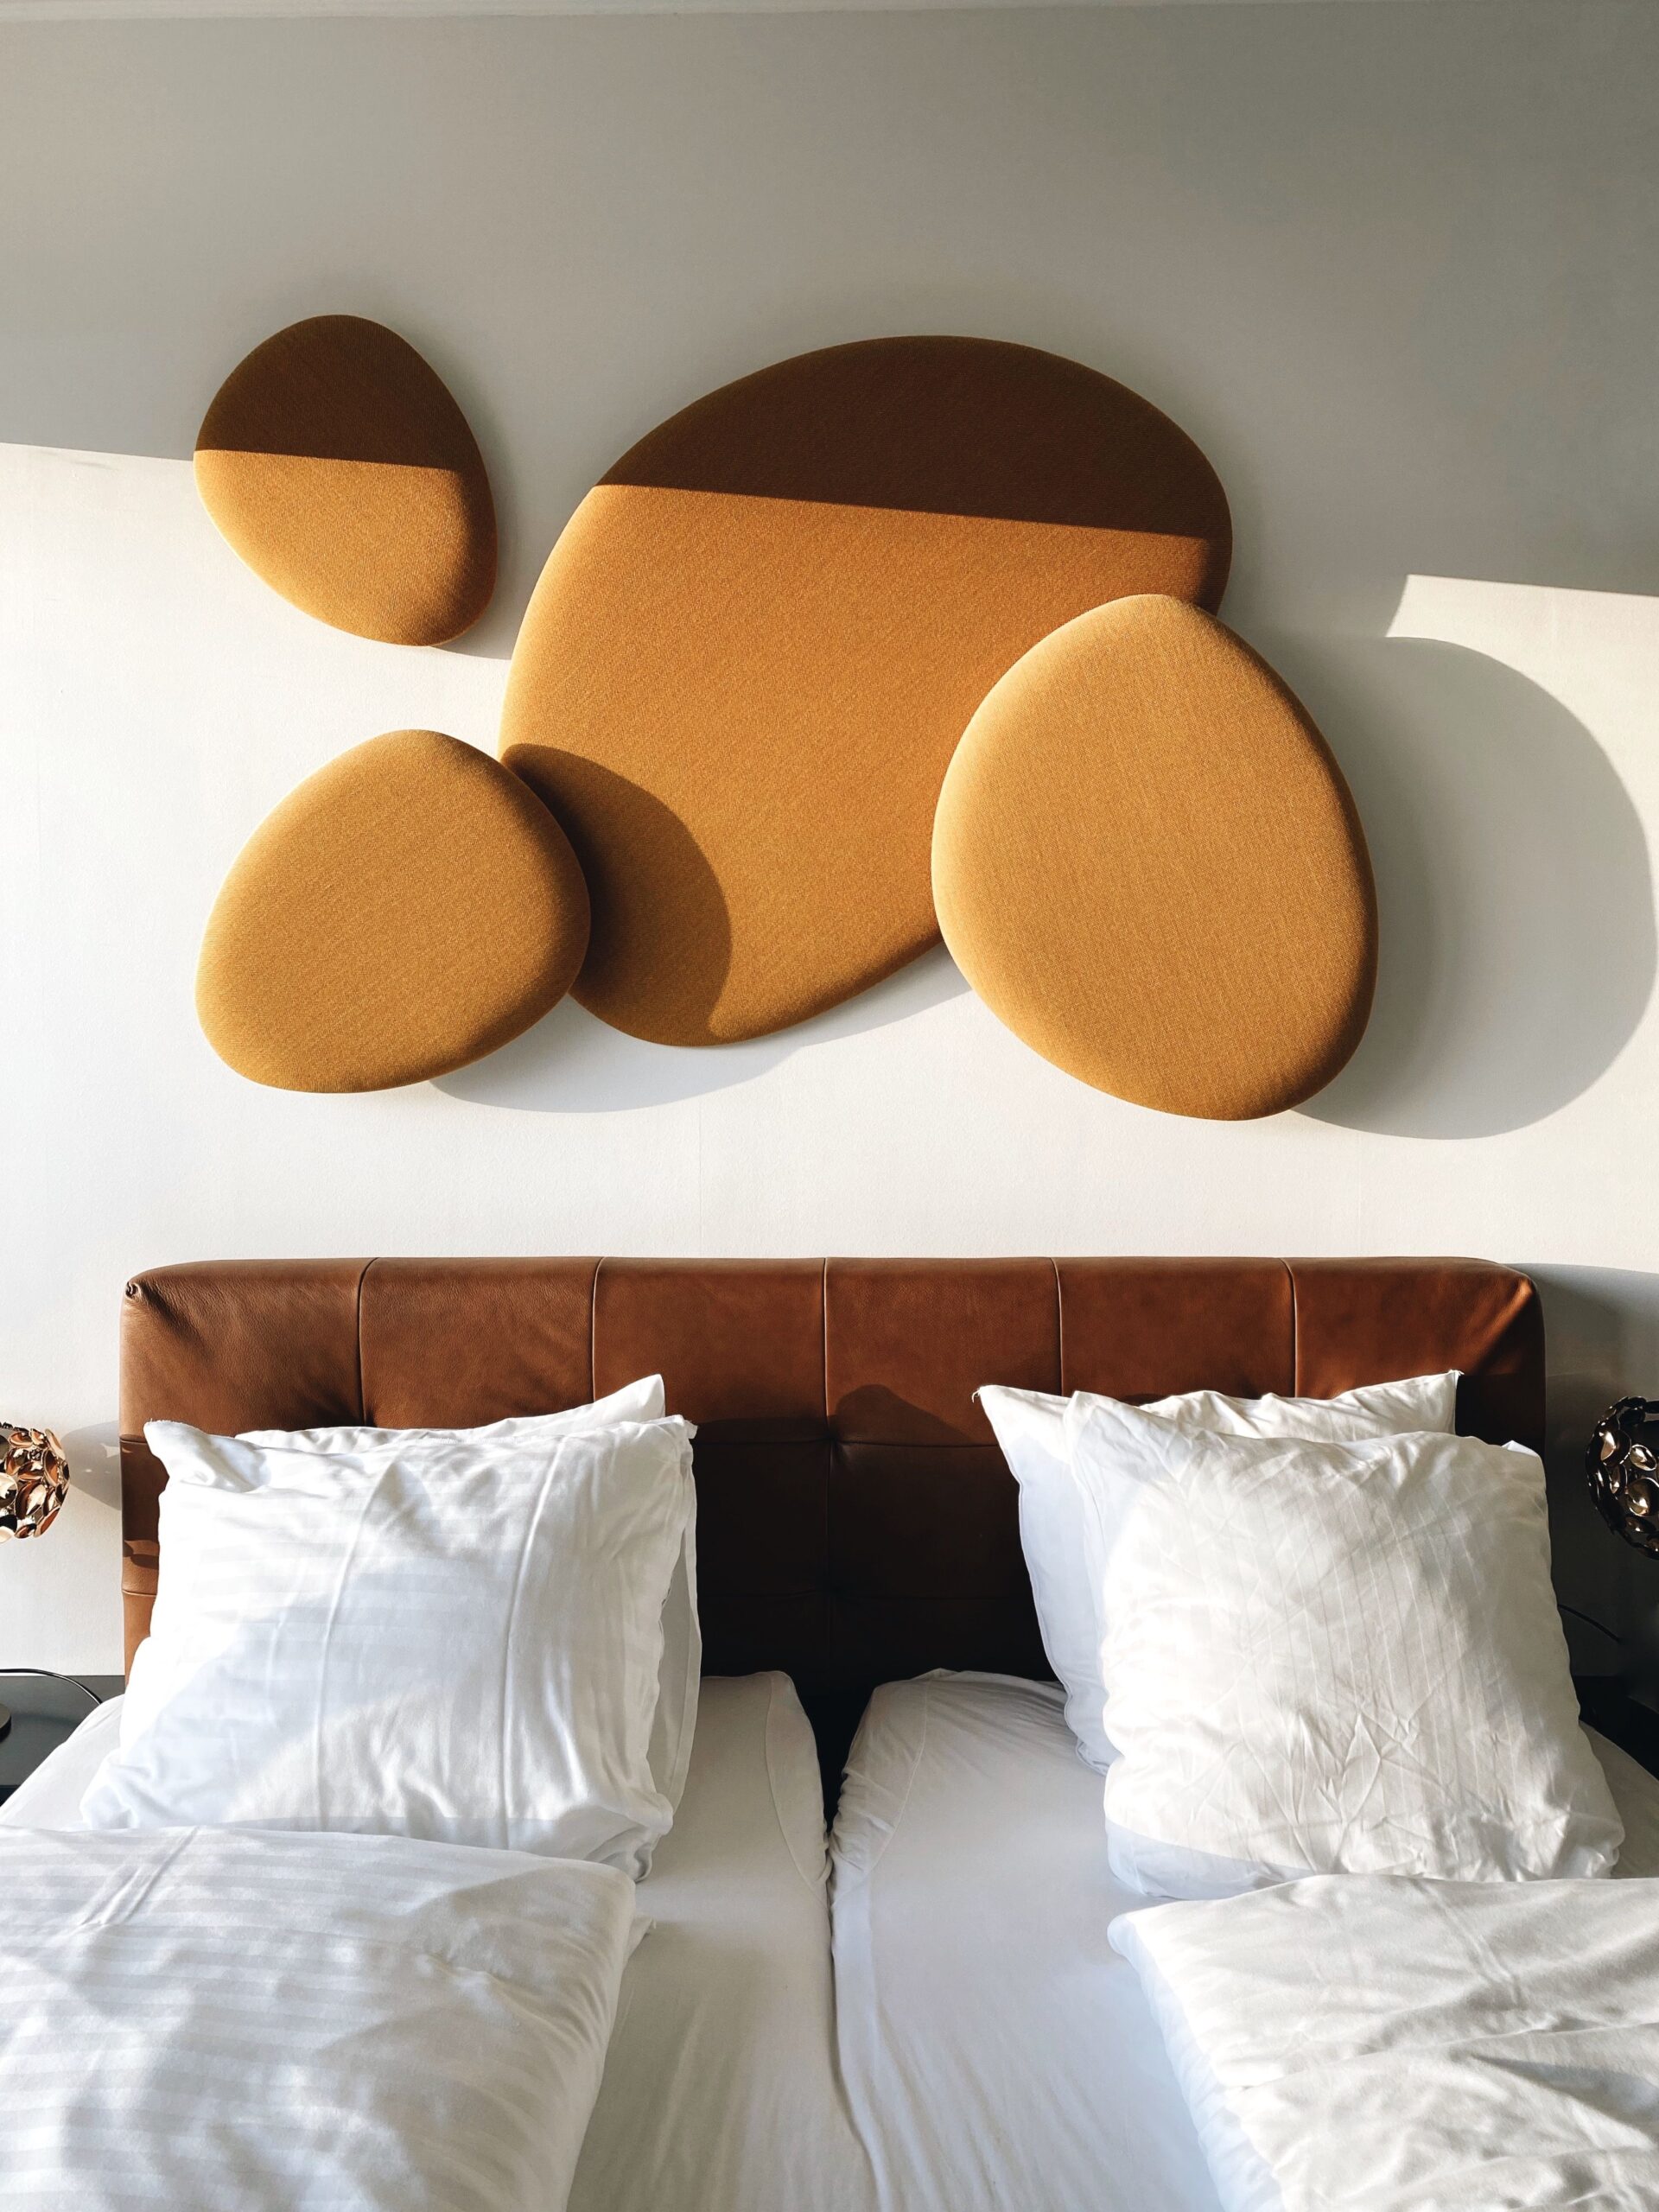 Fascinating and One-of-a-Kind Bedroom Furniture